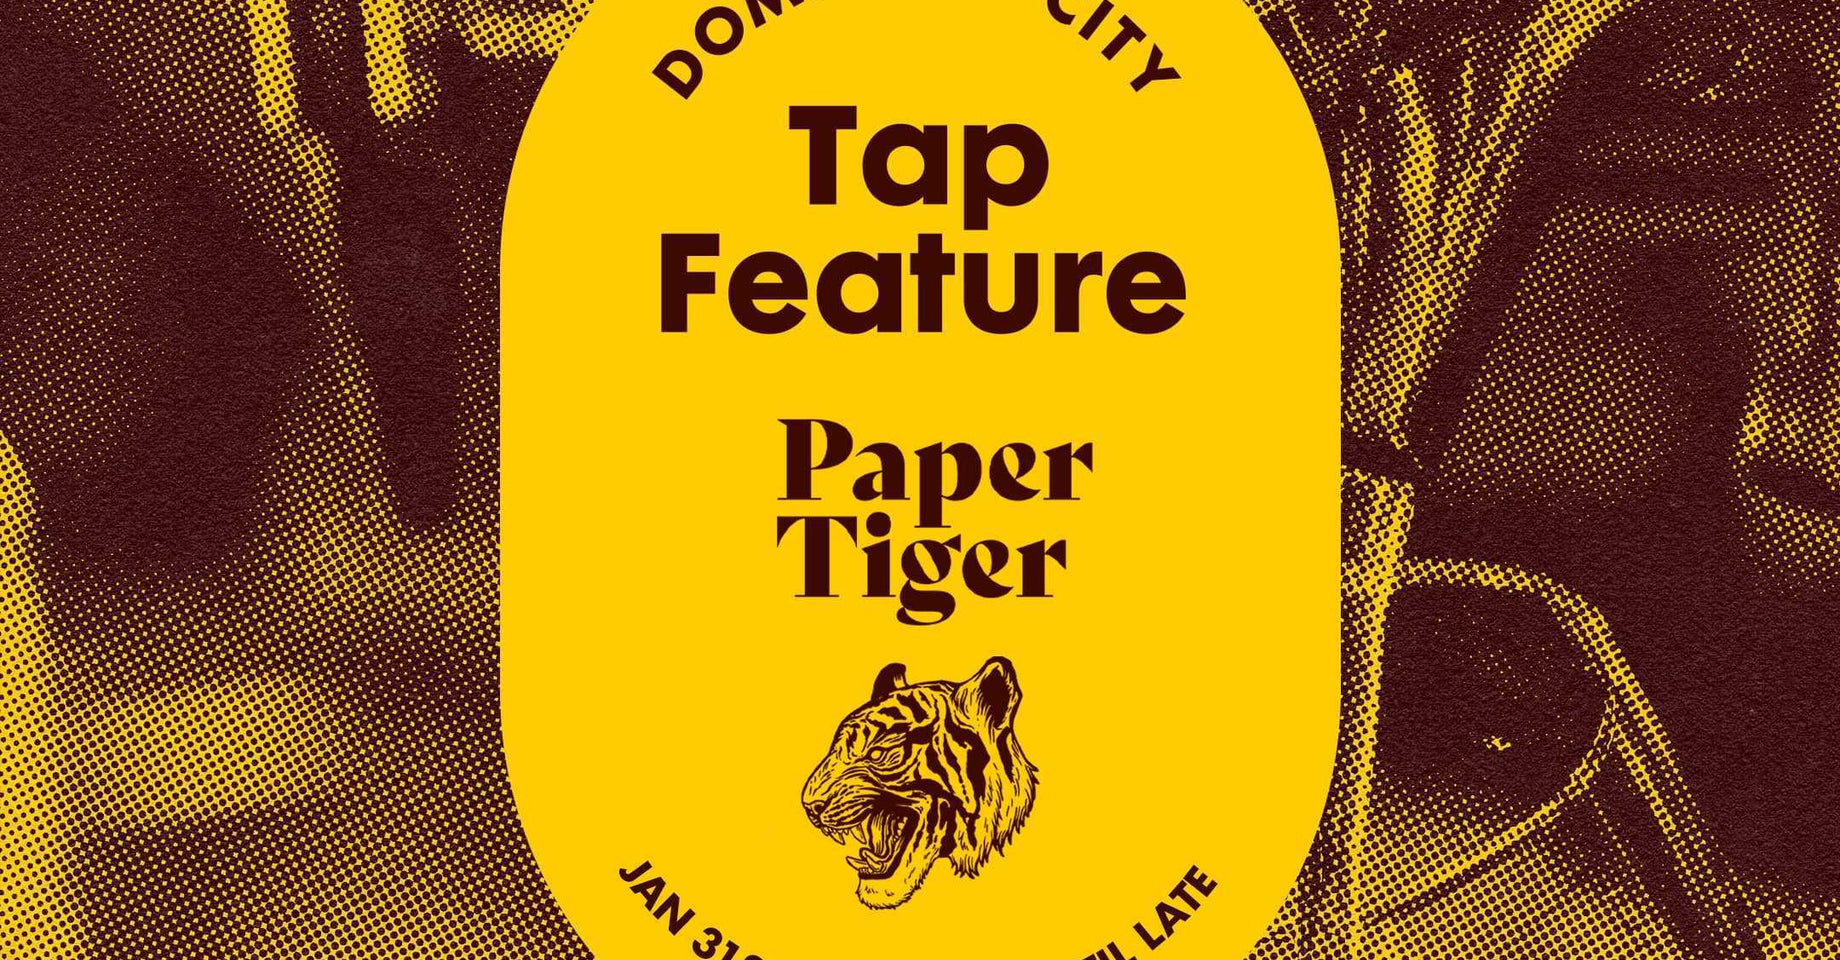 Tap Feature at Paper Tiger